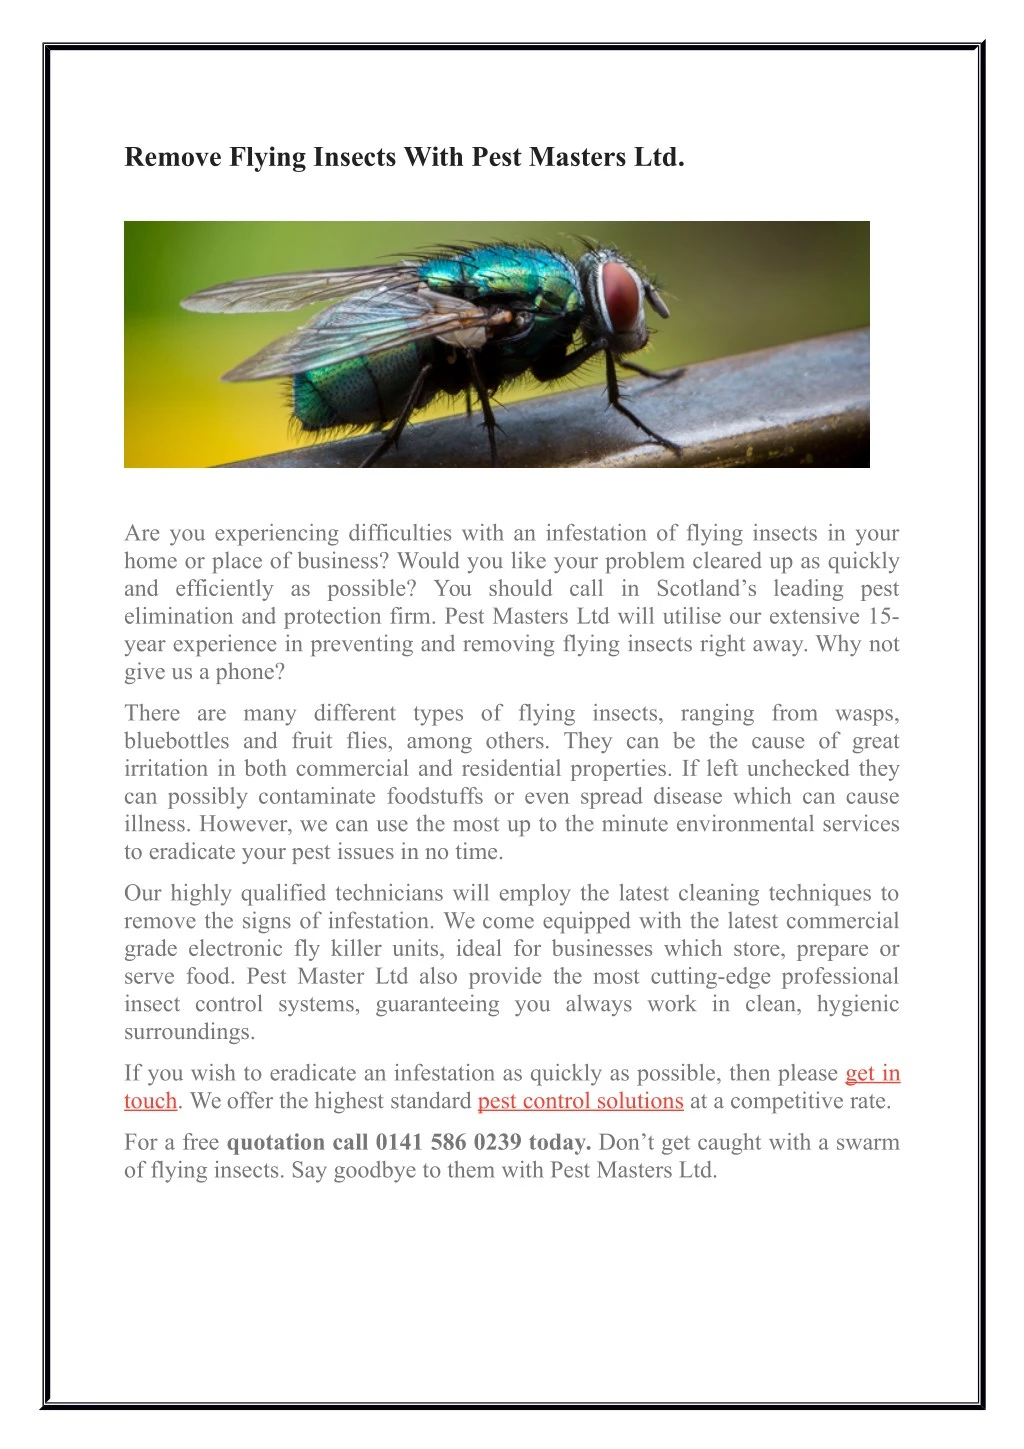 remove flying insects with pest masters ltd